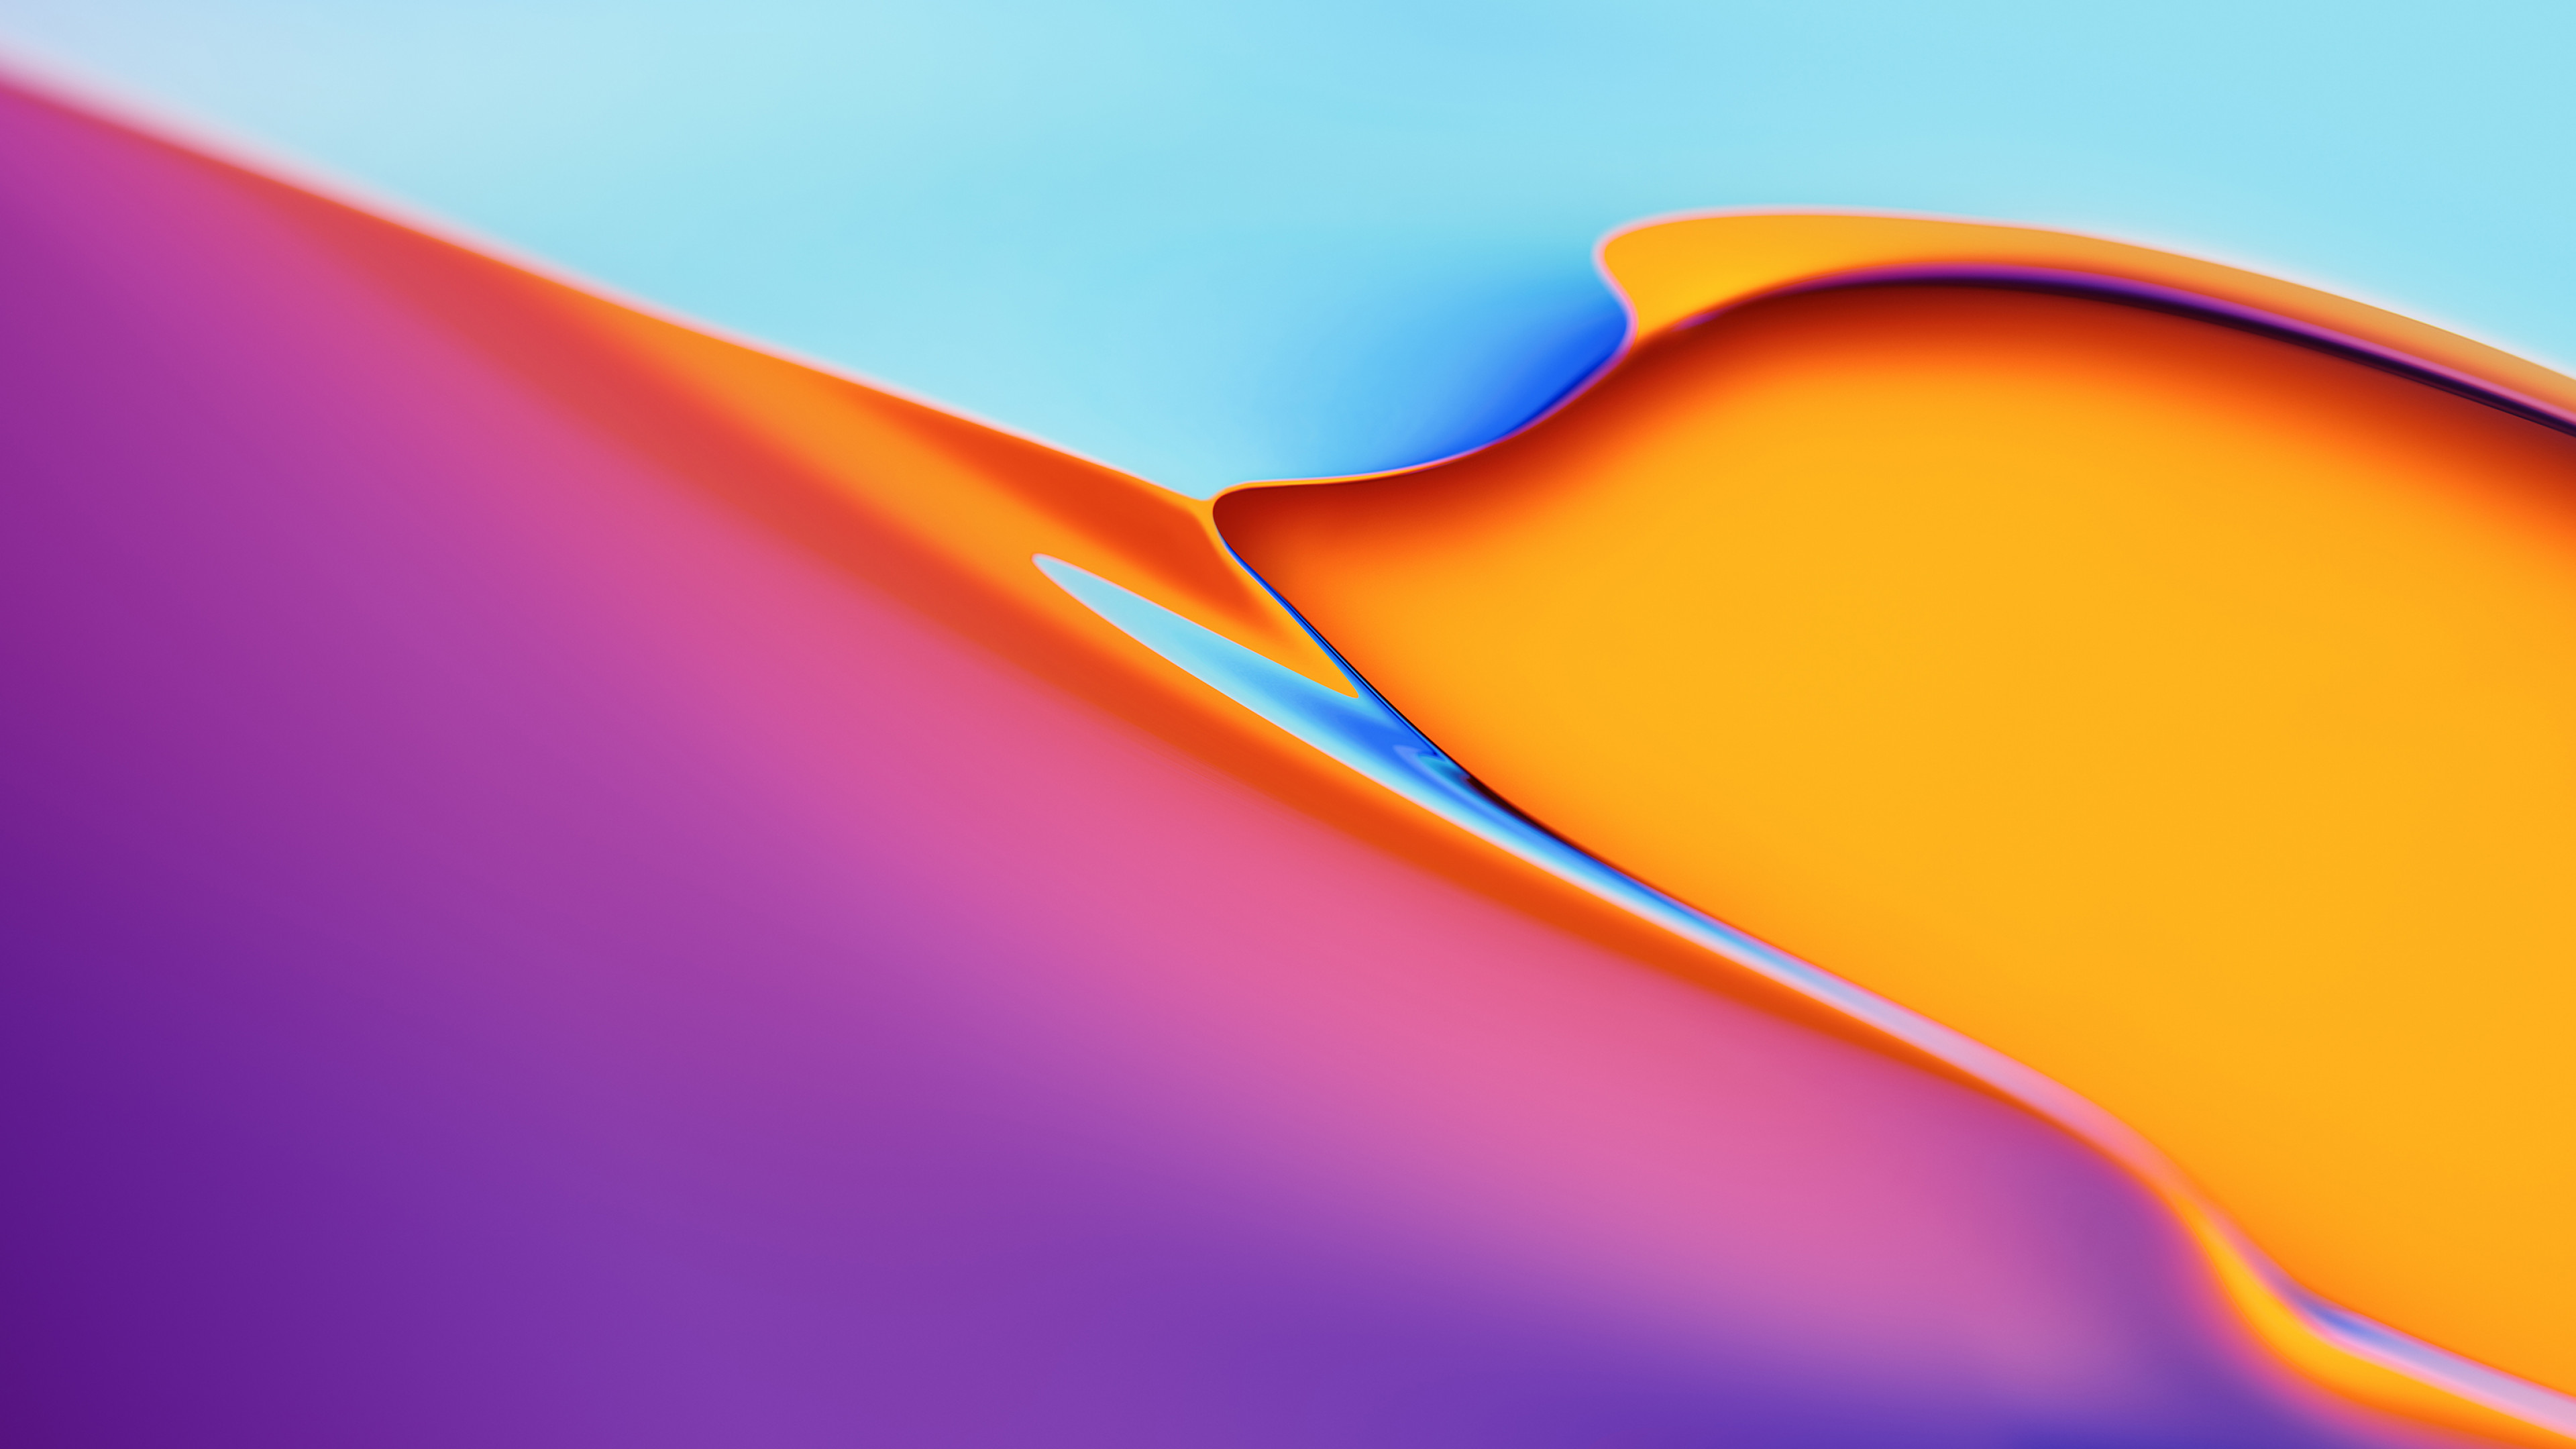 Wallpaper OnePlus TV, abstract, colorful, 4K, OS #22195